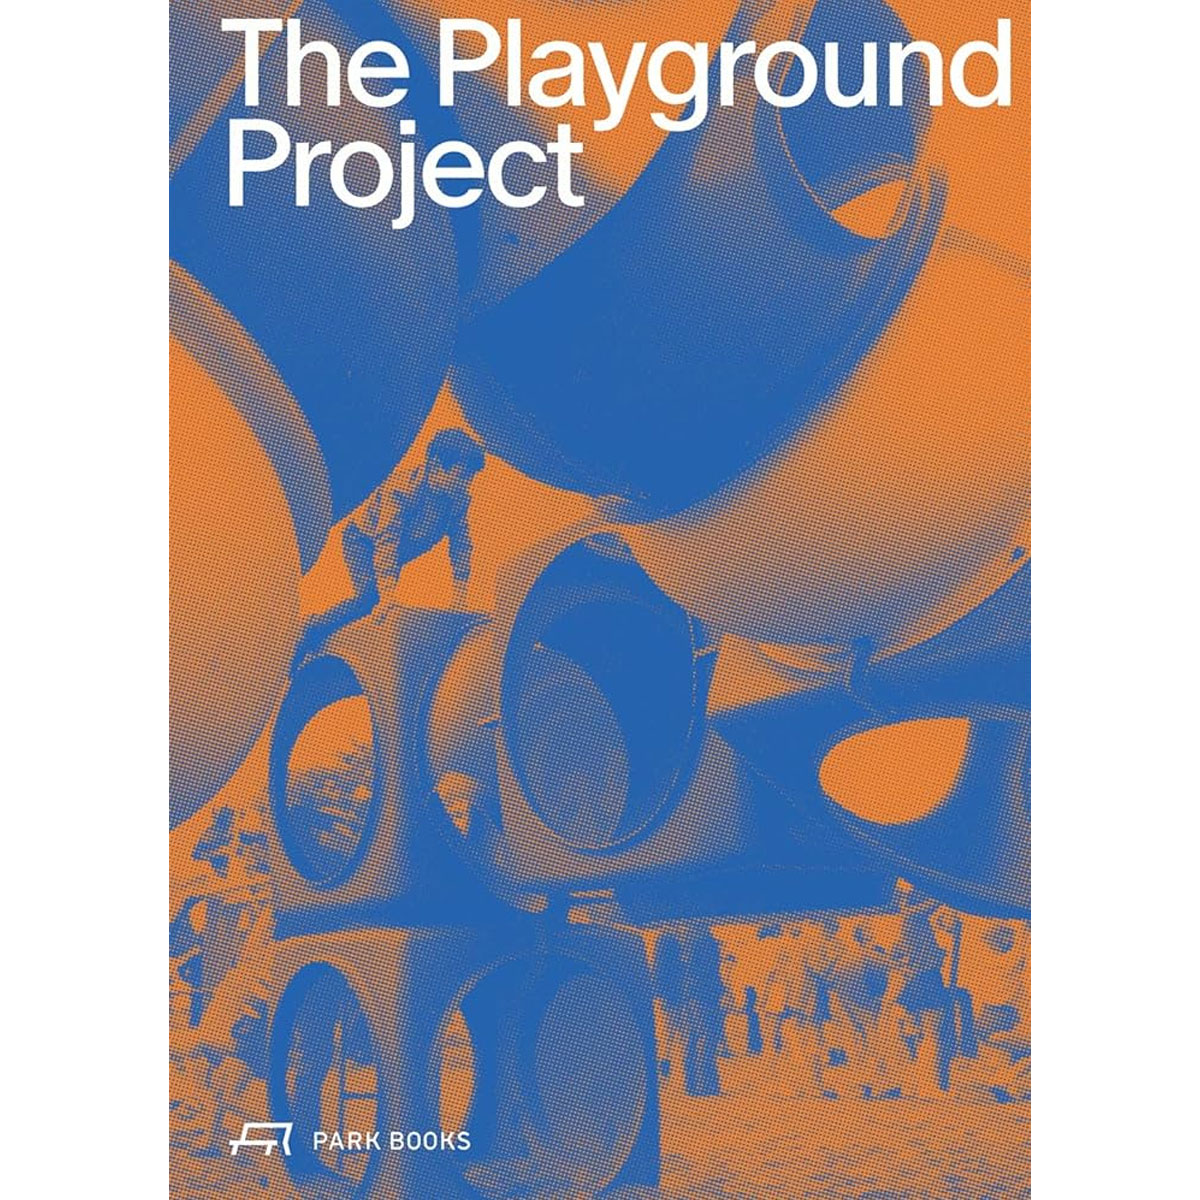 The Playground Project Edited by Gabriela Burkhalter